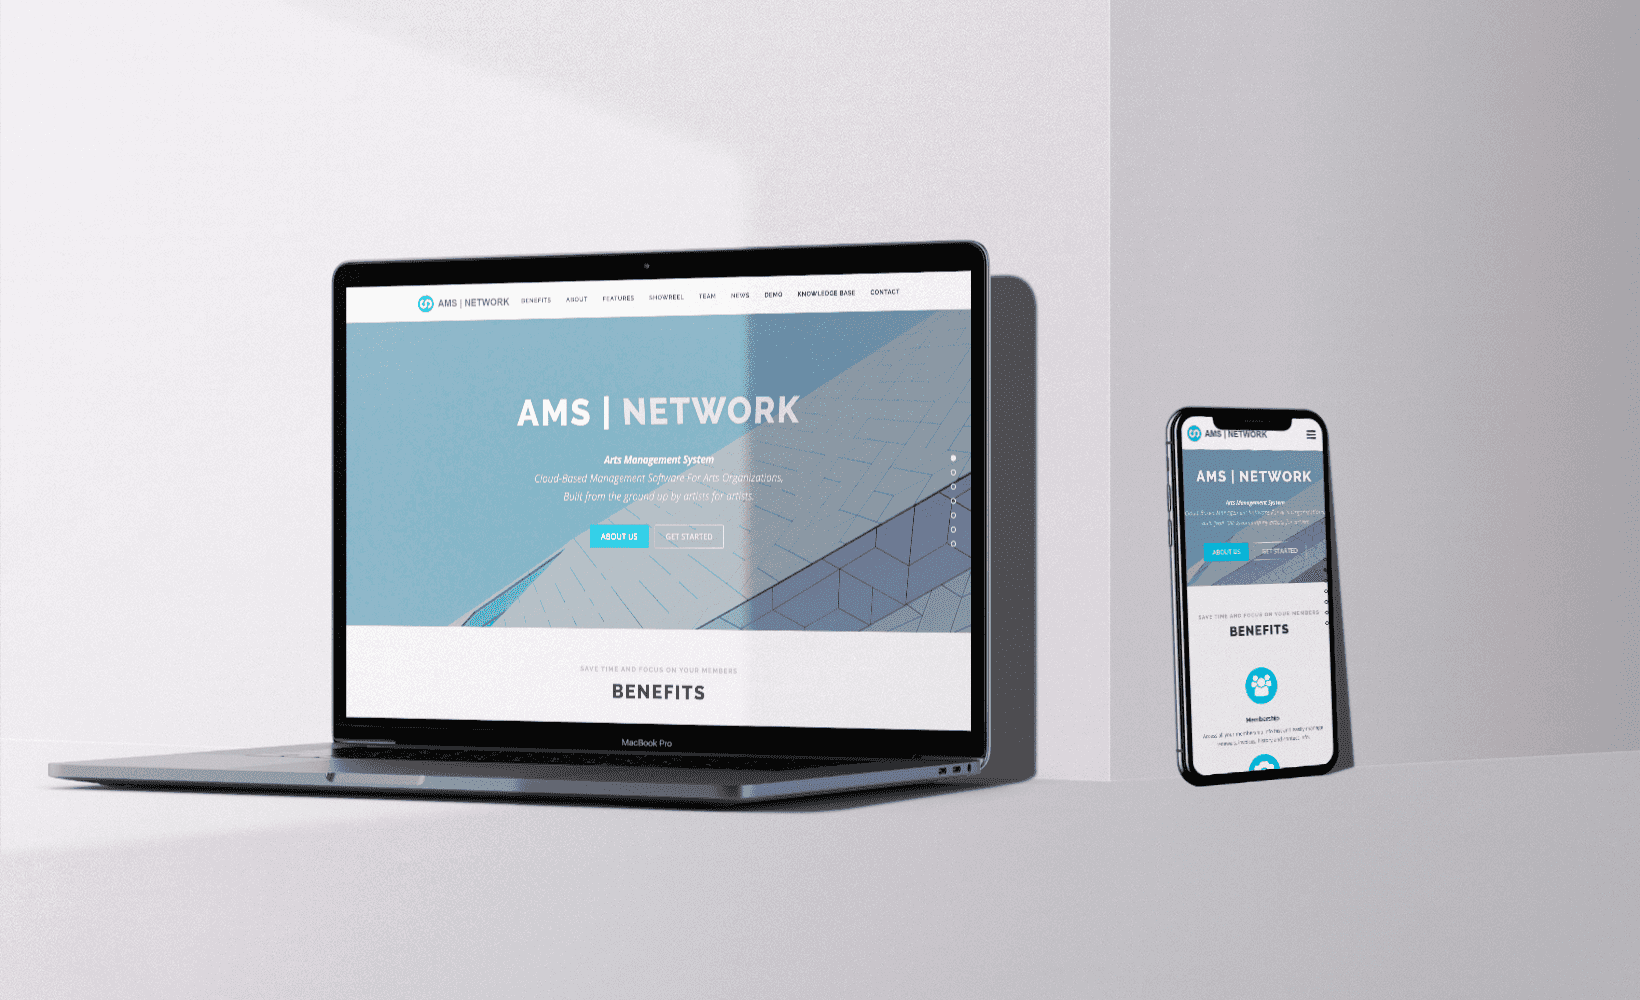 AMS Network is a custom backend tool that is used by Film communities to do various activities. Built the website in Ruby on Rails and ReactJS for front-end. Built a Video platform on NodeJS and integration with AWS ElasticTranscoder to render large video files.